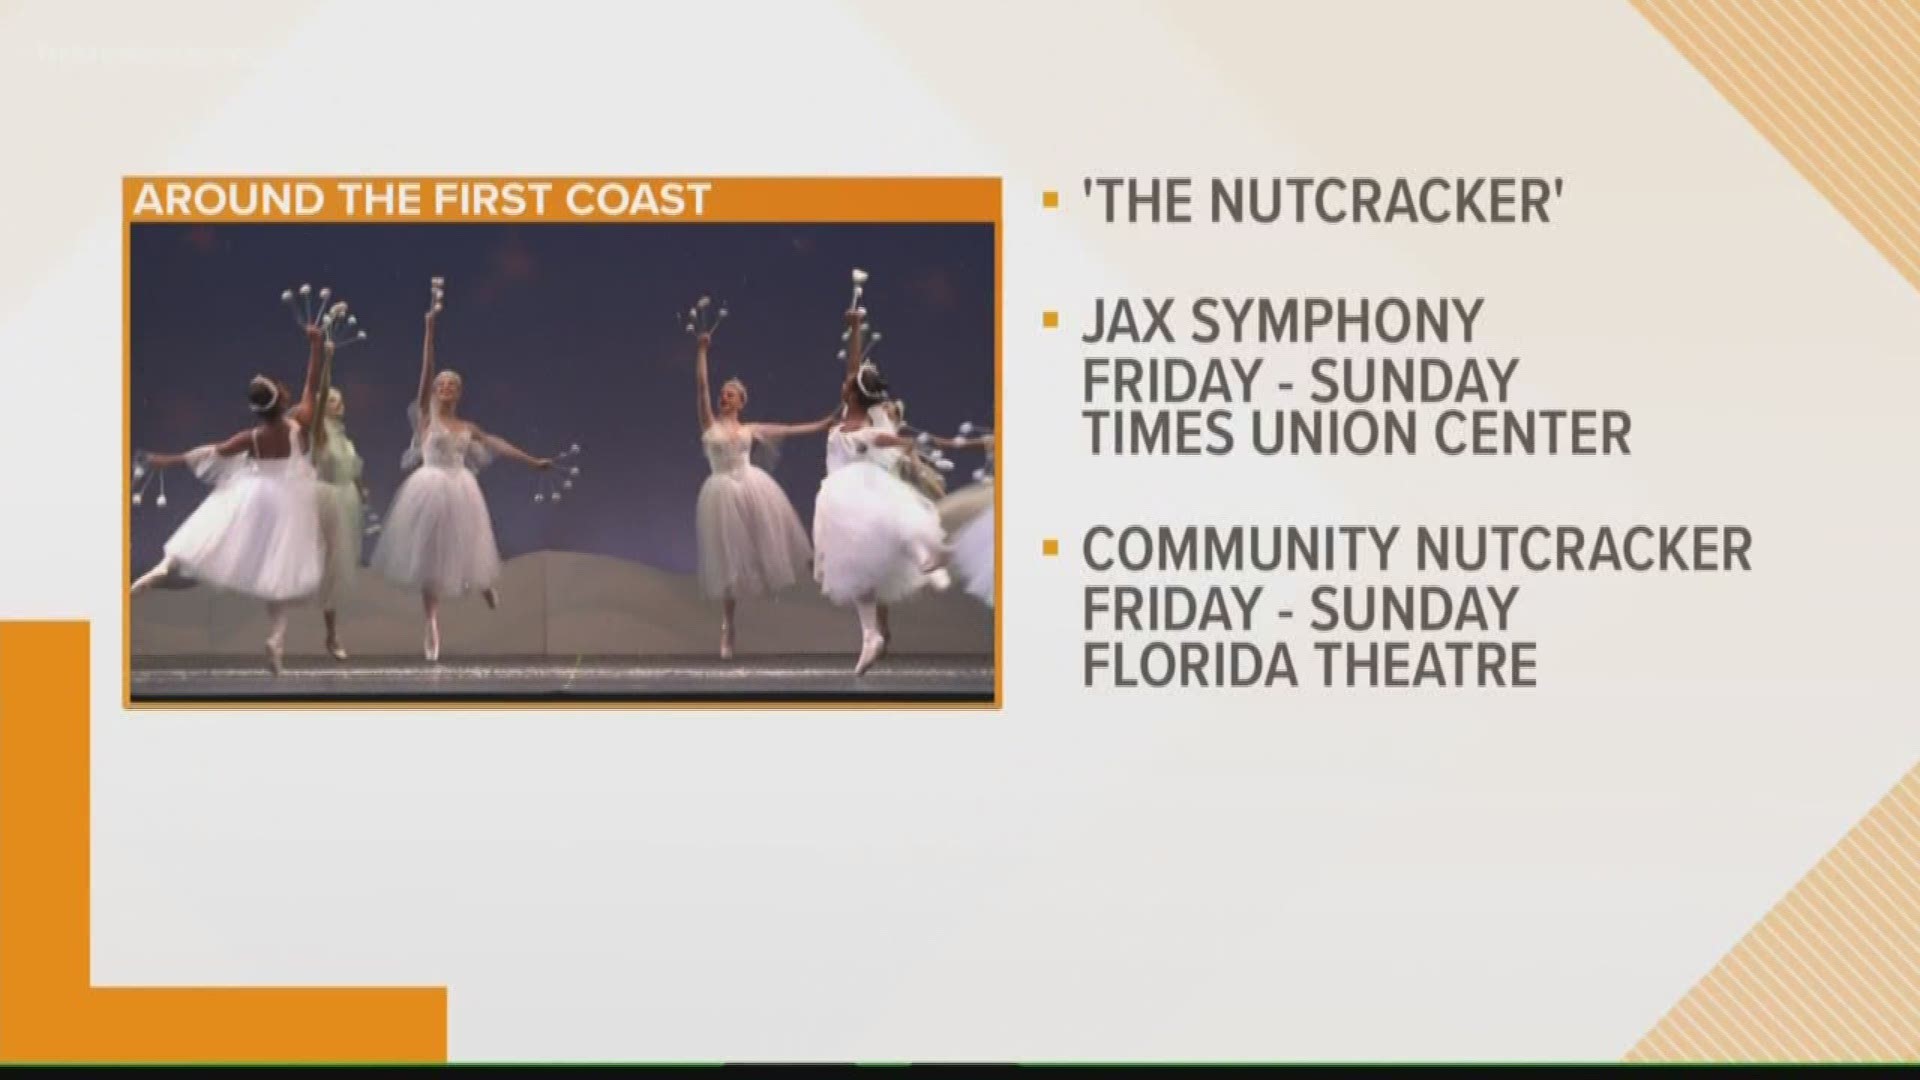 There are several holiday events happening around the First Coast, including Meet N' Grease at Daily's Place!